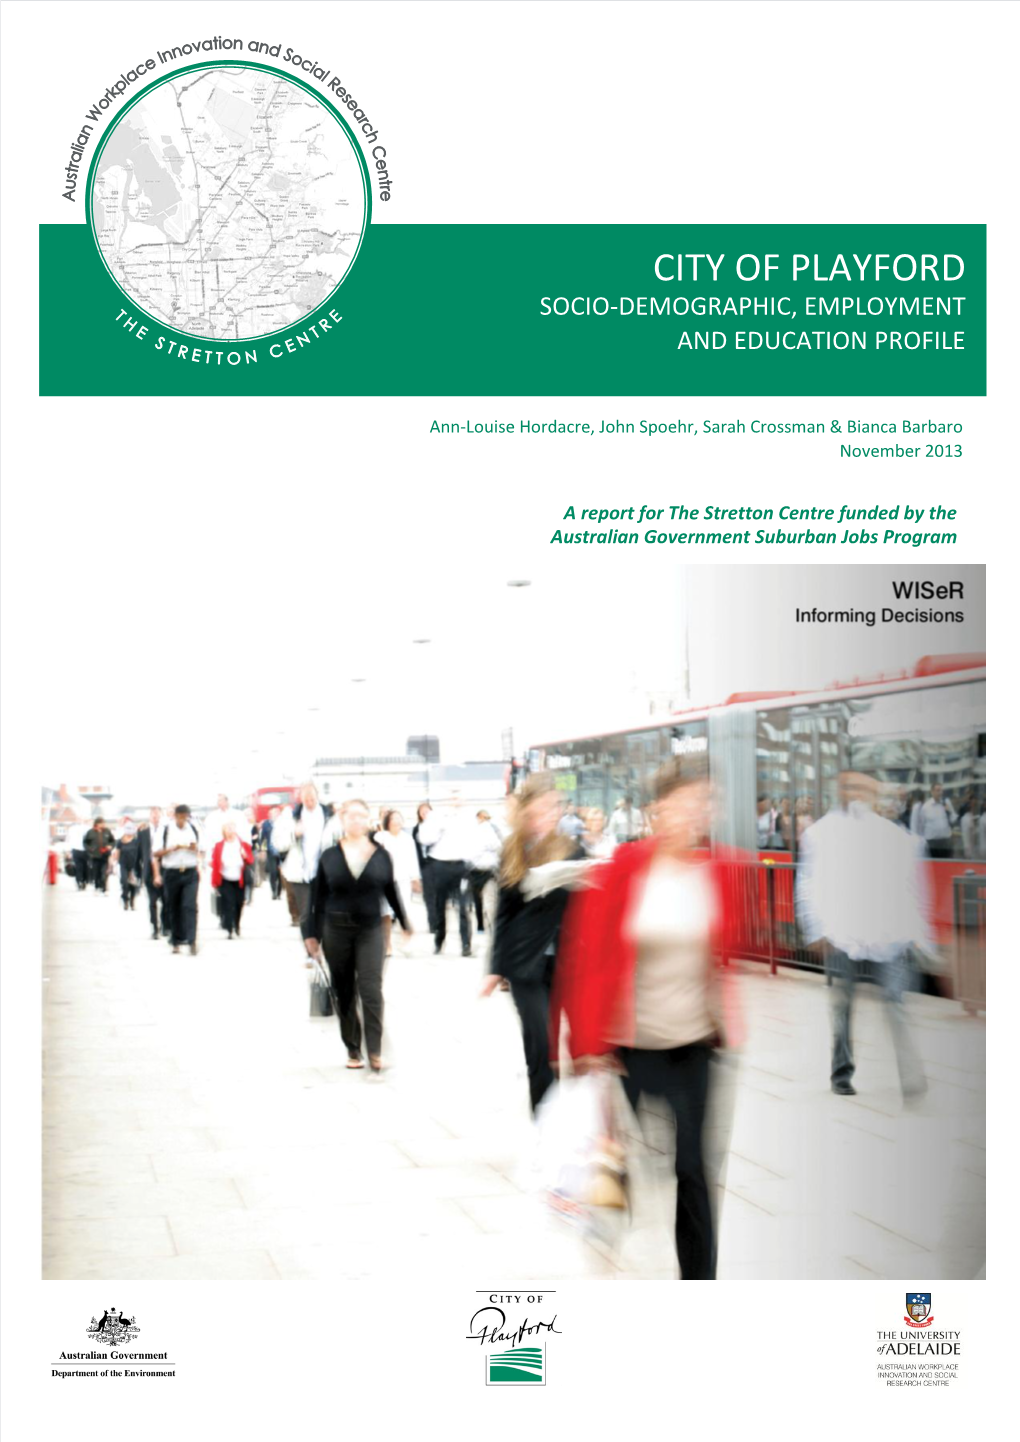 City of Playford Socio-Demographic, Employment and Education Profile